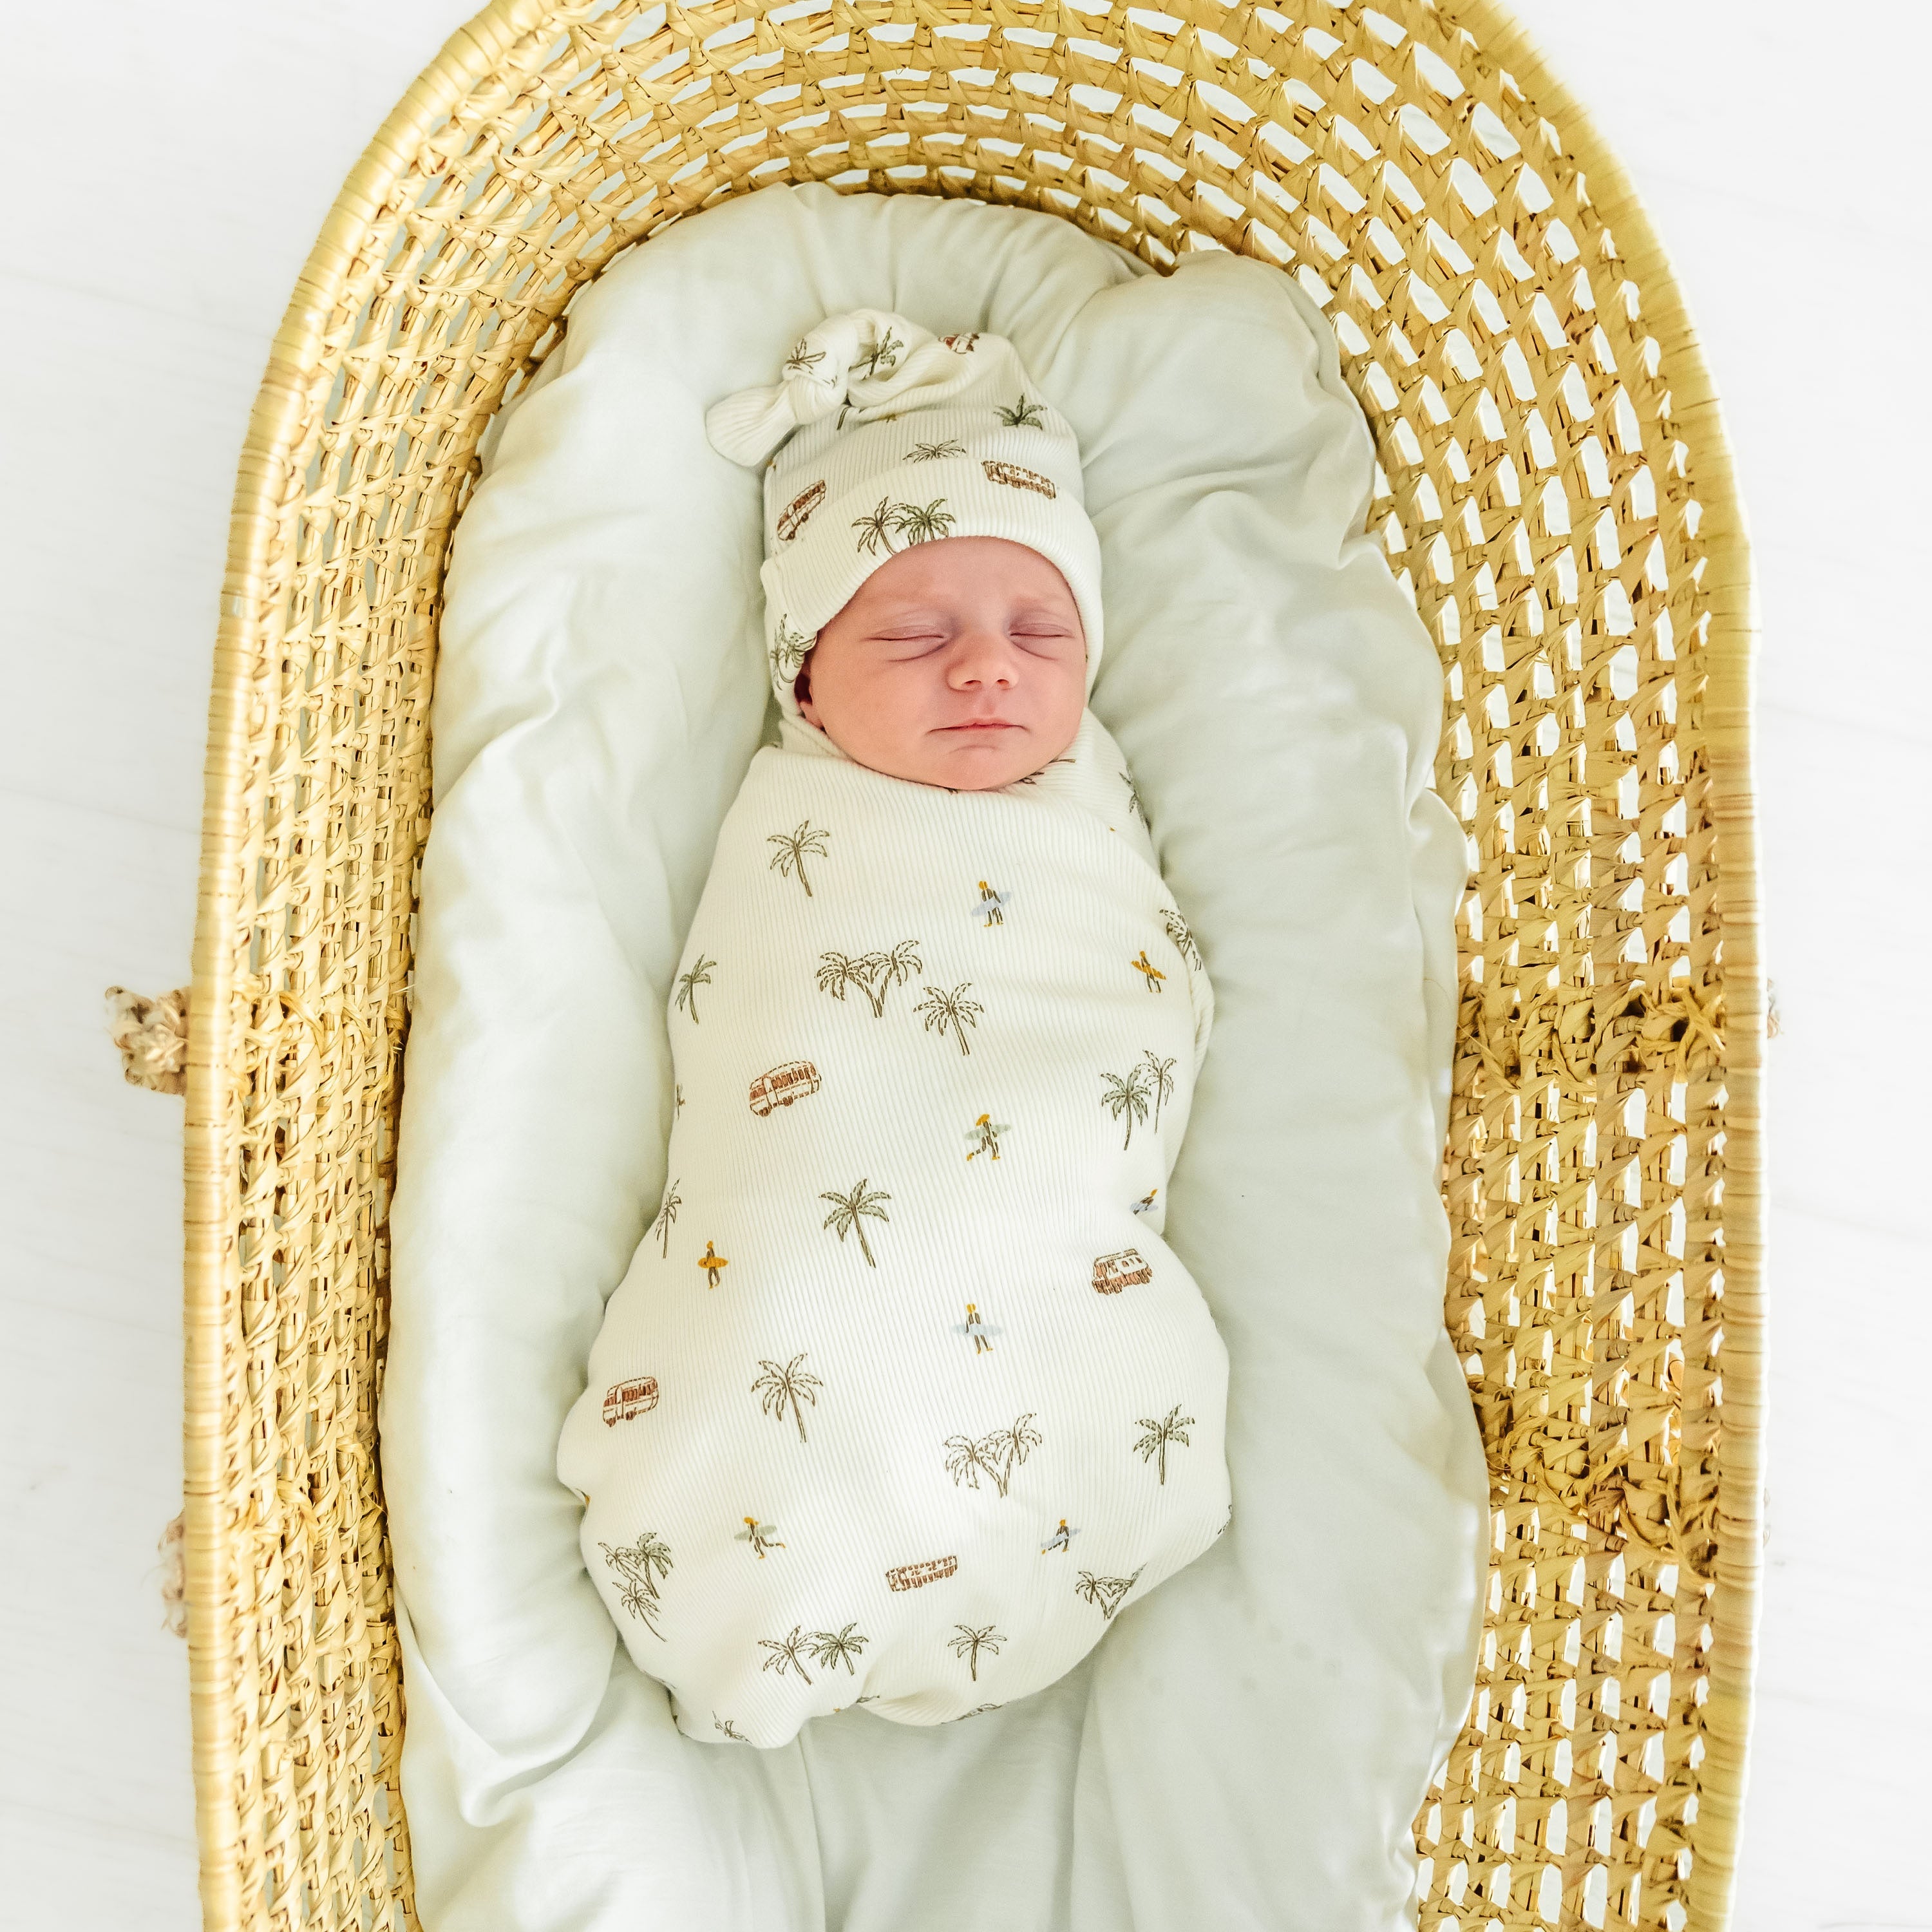 A newborn baby swaddled in an Organic Swaddle Blanket & Hat from Makemake Organics, sleeping in a padded, oval-shaped wicker bassinet on a white background.